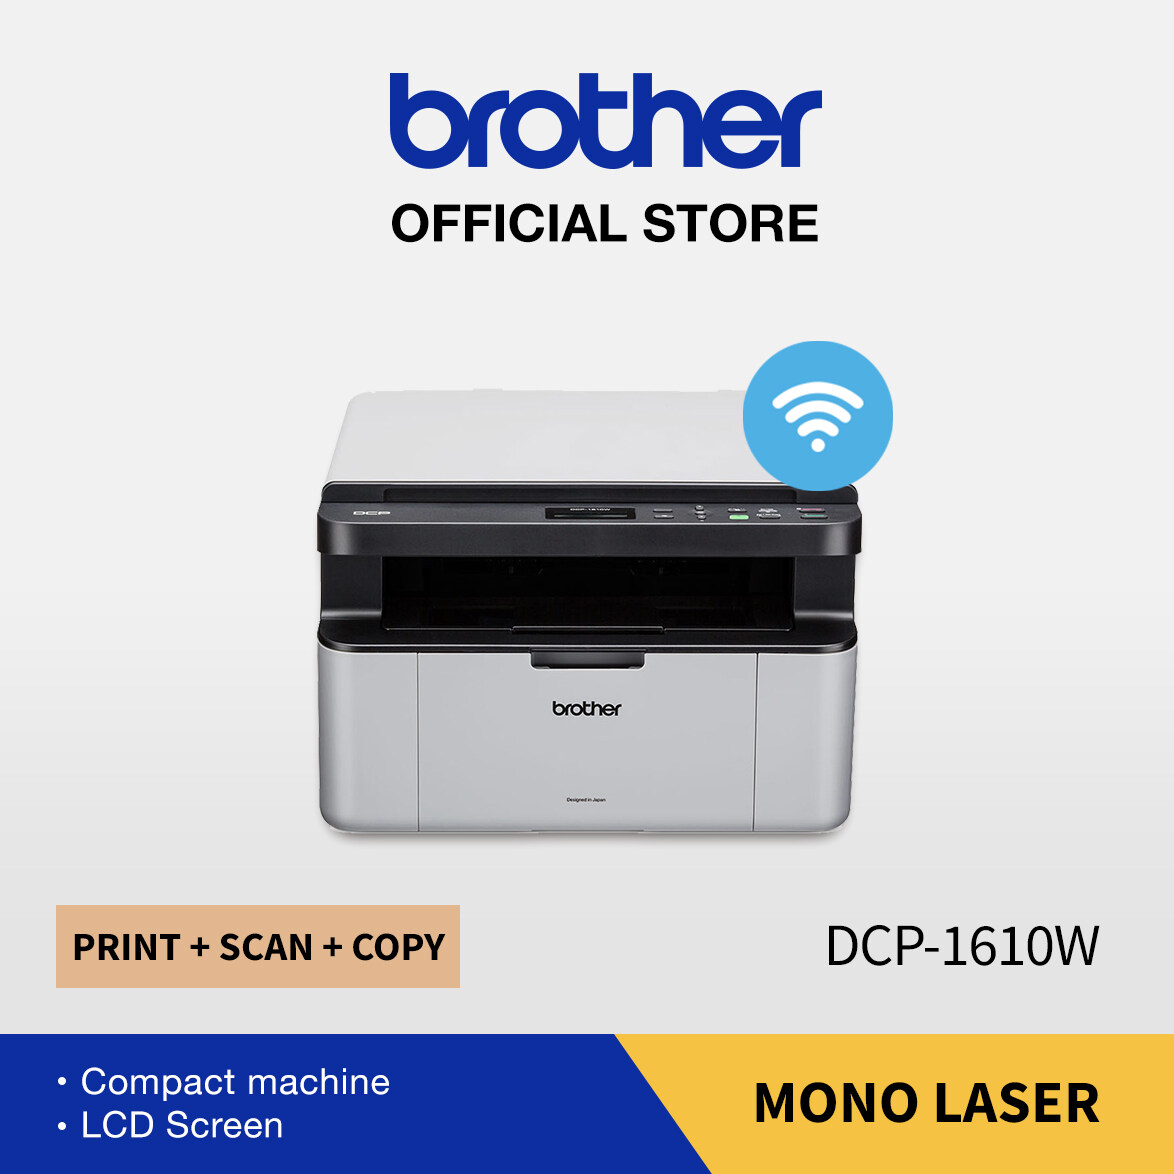 Brother 1610w. Brother DCP 1610. DCP-1610w принтер. Муф brother 1610 w.